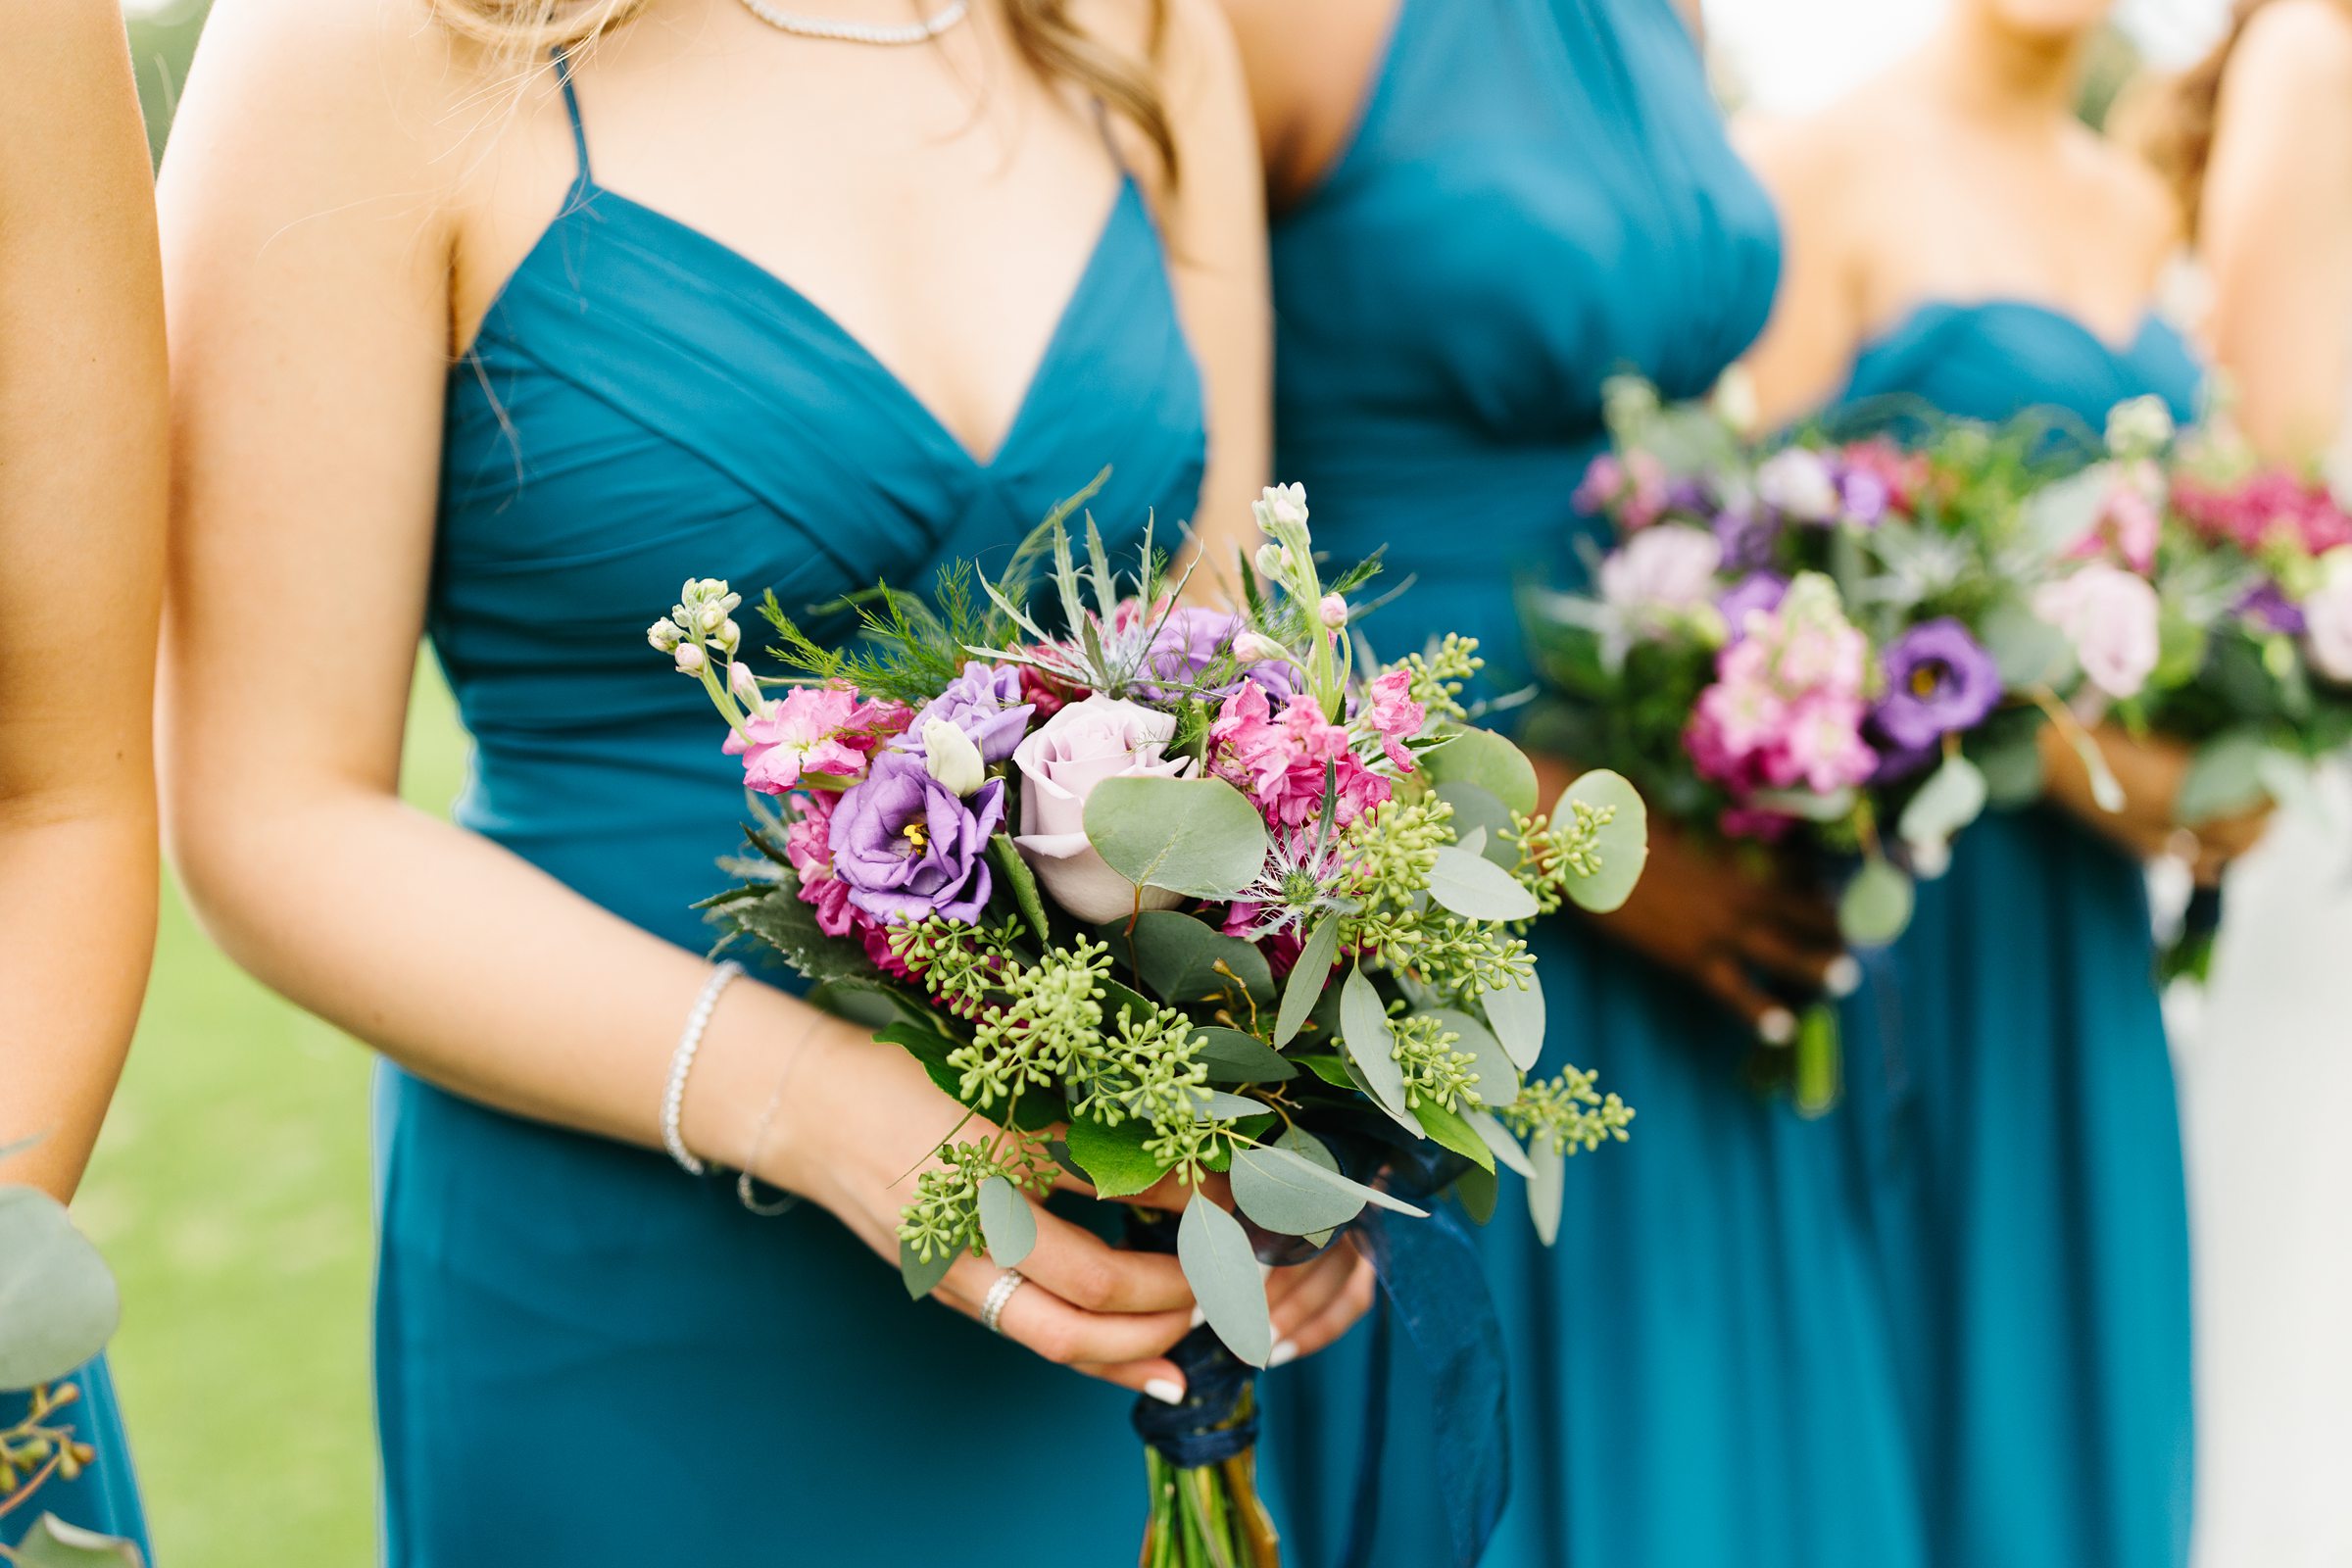 Close up picture of the bridesmaid's flower bouquets by Detroit Wedding Photographer Michele Maloney